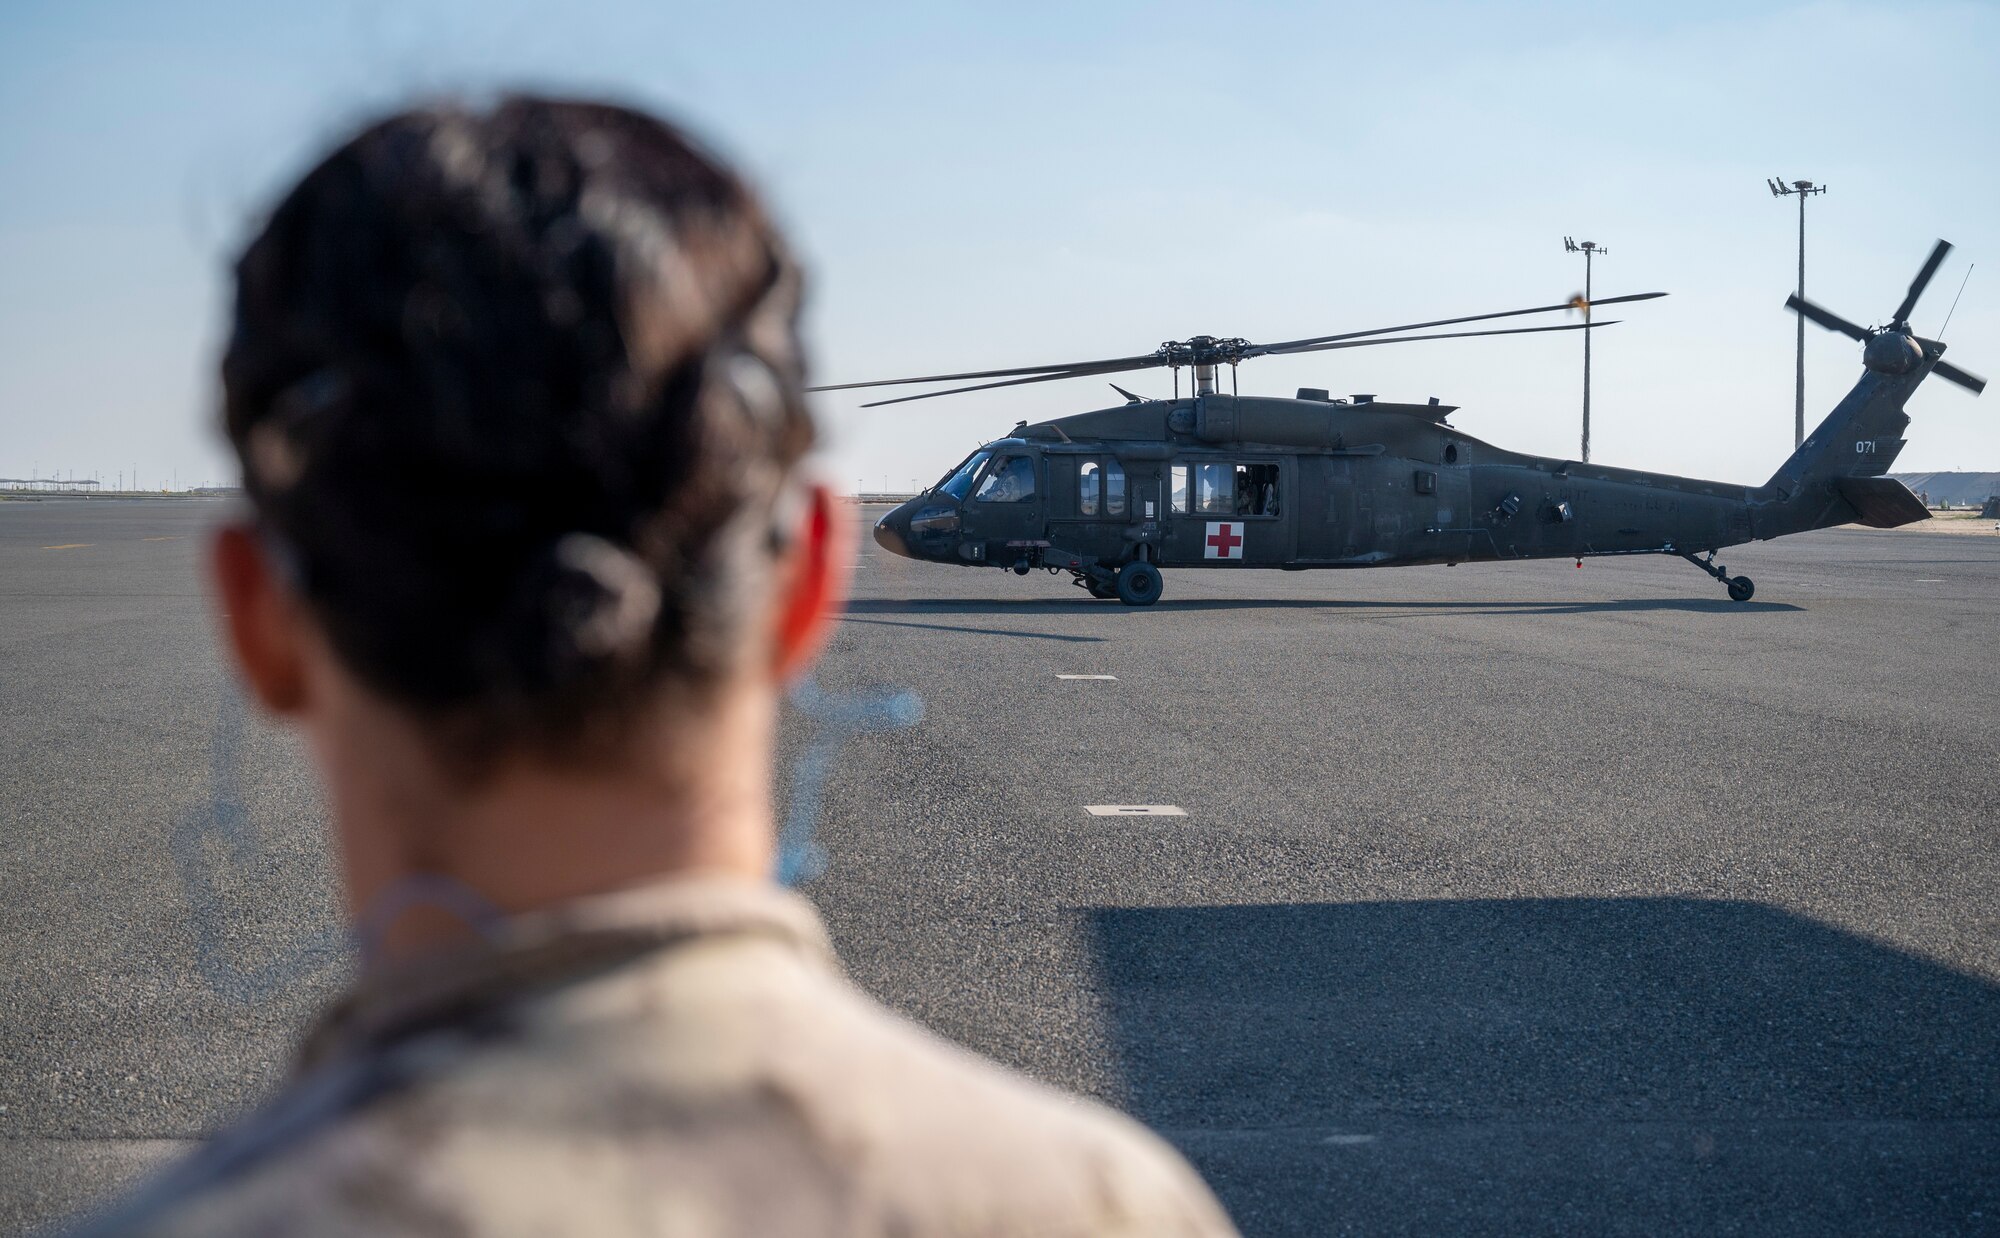 A Canadian Army medic watches as a U.S. Army UH-60 Blackhawk helicopter lands nearby at Ali Al Salem Air Base, Kuwait, Jan. 20, 2023.